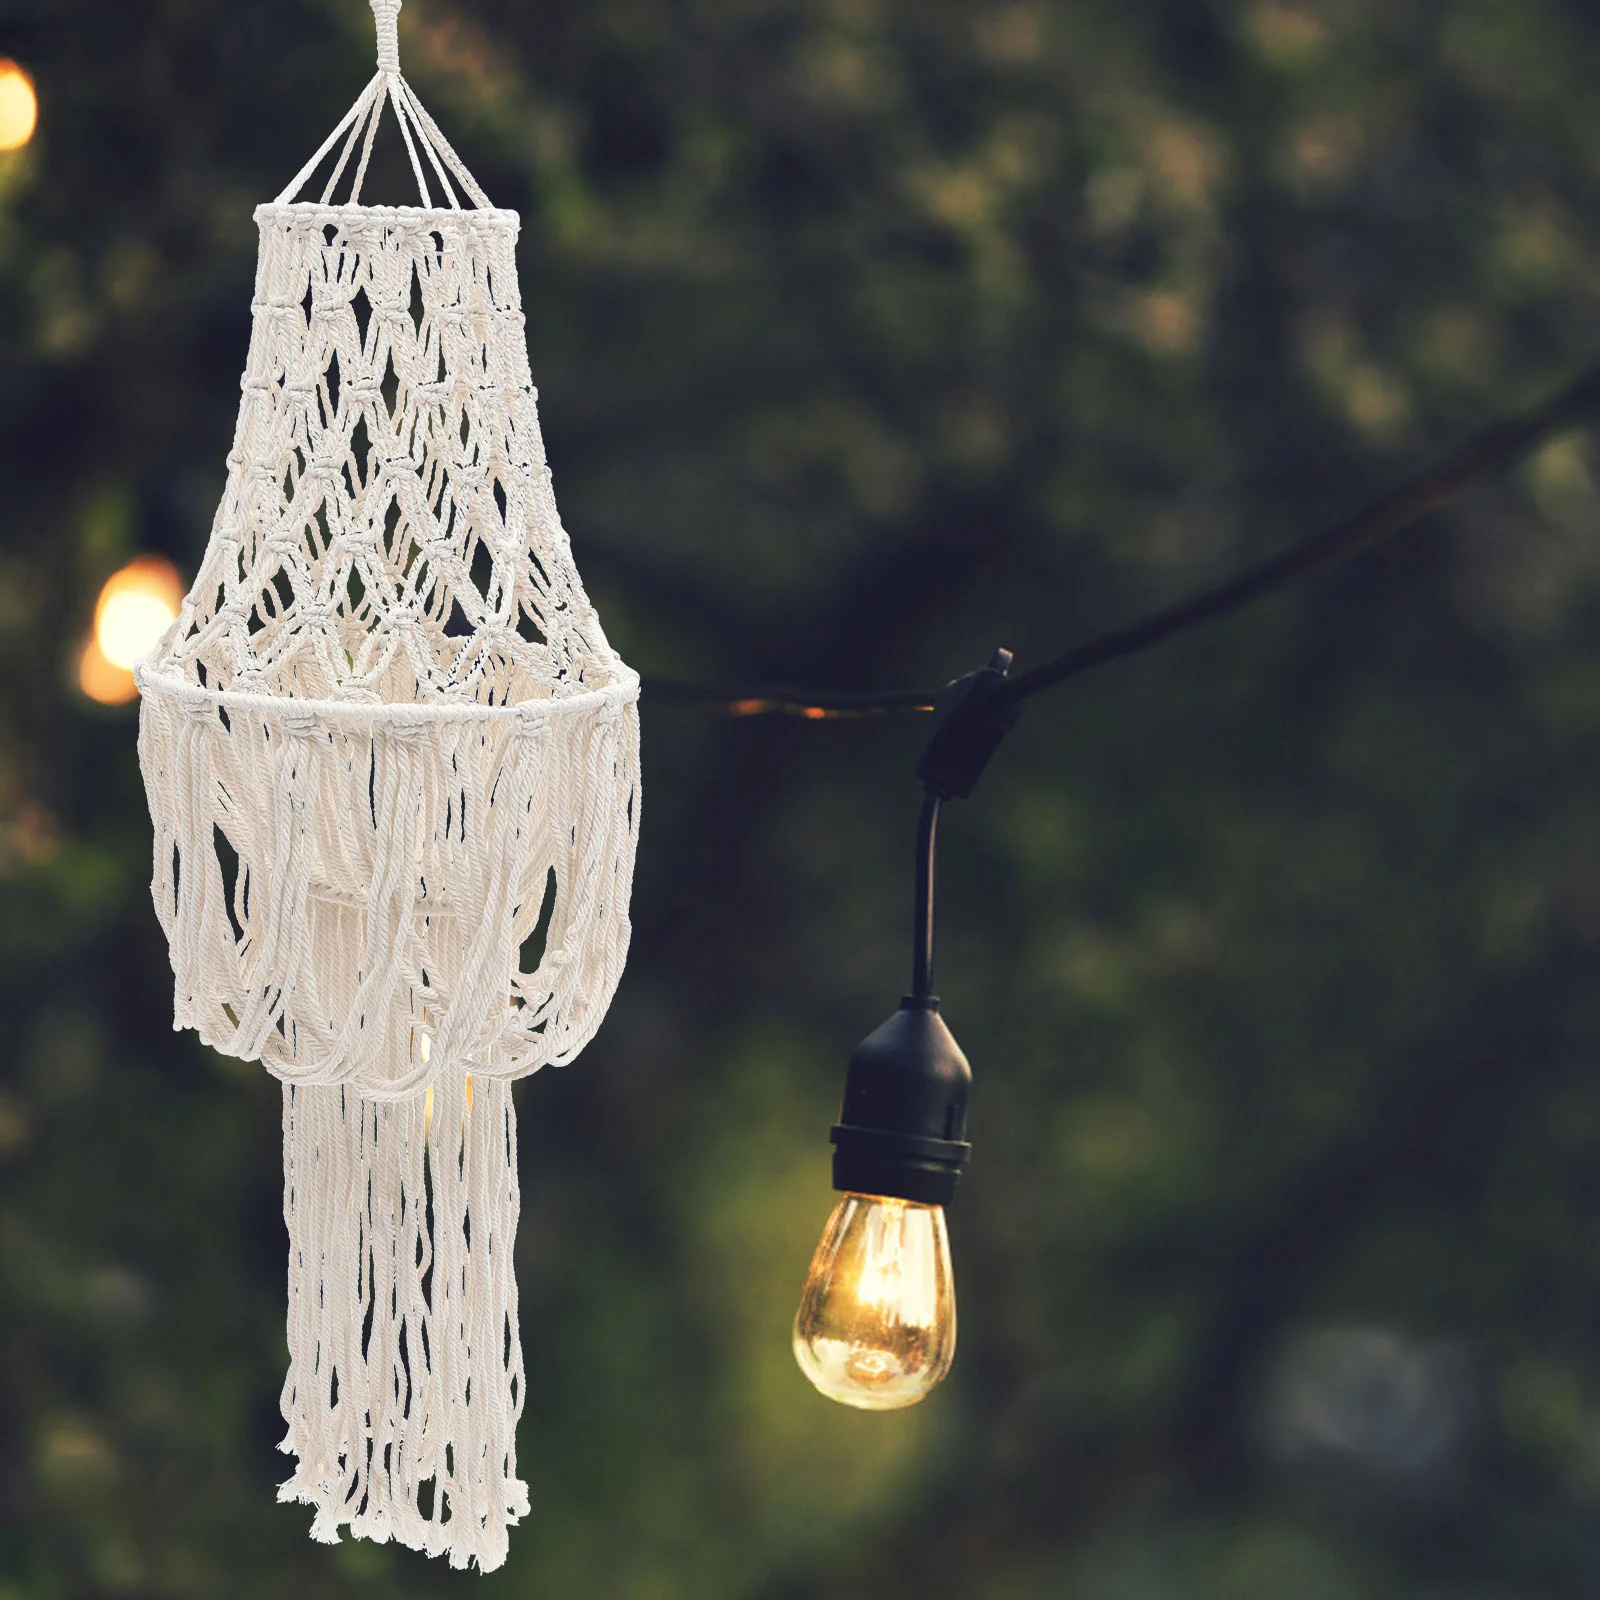 

Decor Fringed Cotton Rope Lampshade Pendant Light Accessories Macrame Hanging Woven Tassel Household Shades